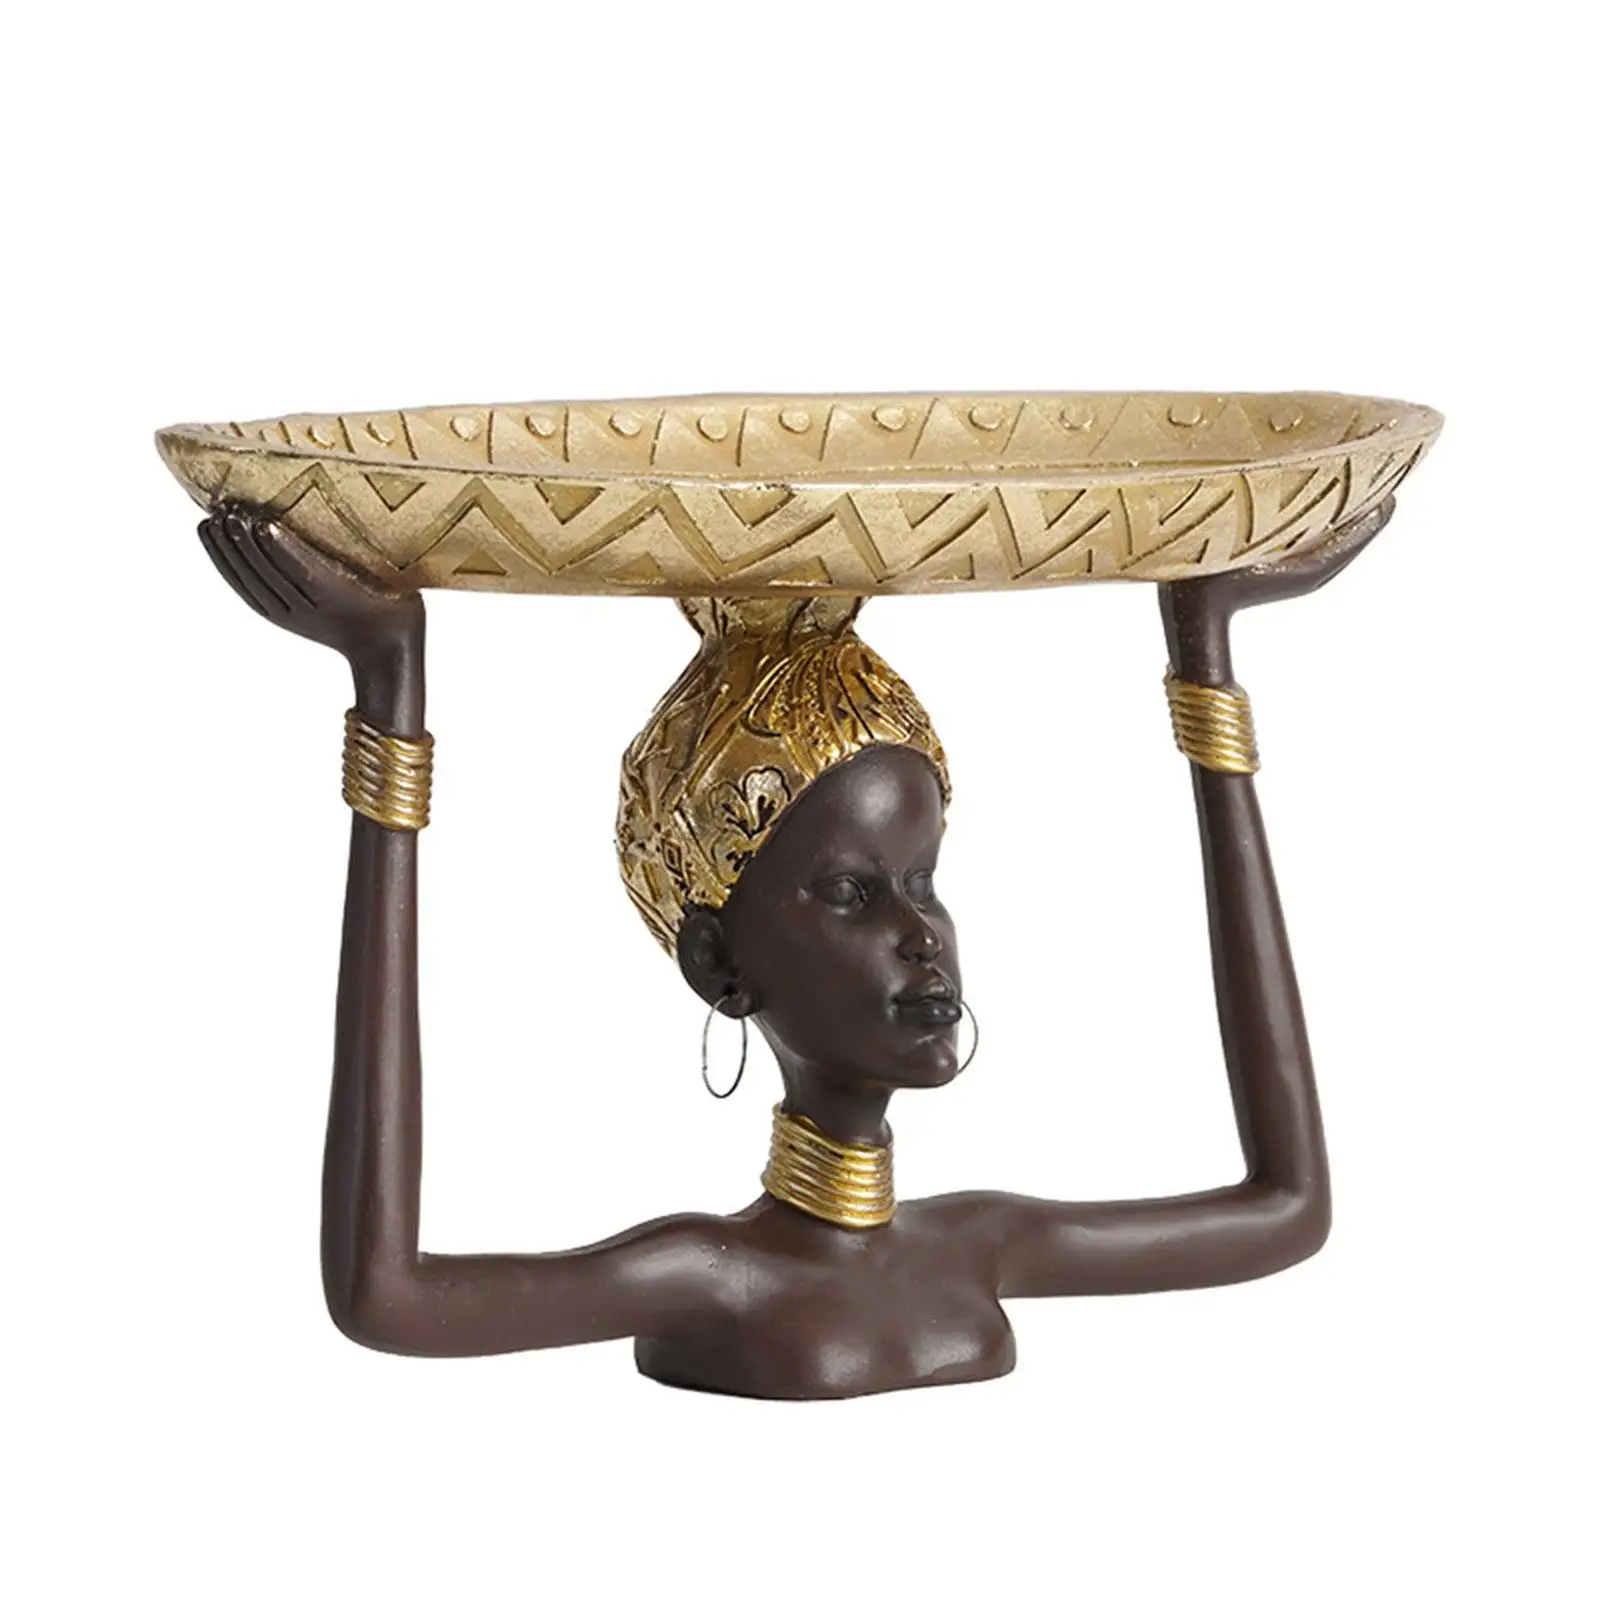 Tribal Lady Statue Tray, African Collectible Modern Decor Table Centerpieces,